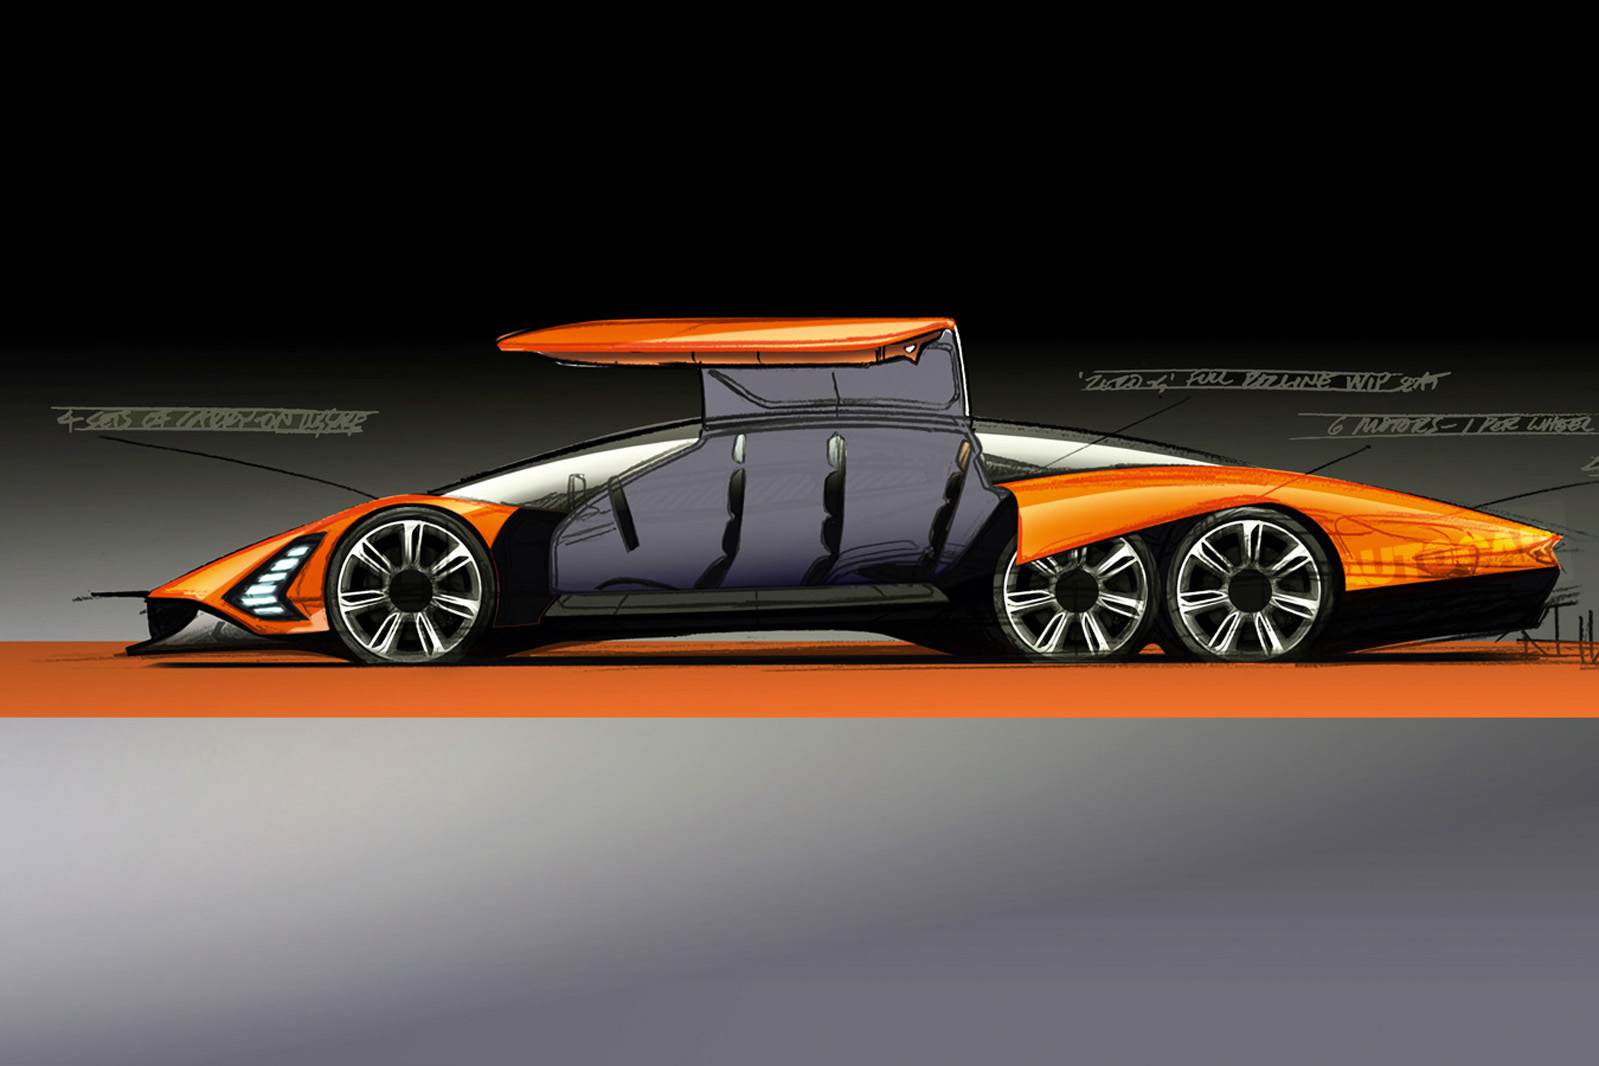 Hennessy launches 2400bhp 6-wheel EV in 2026 - London News Time